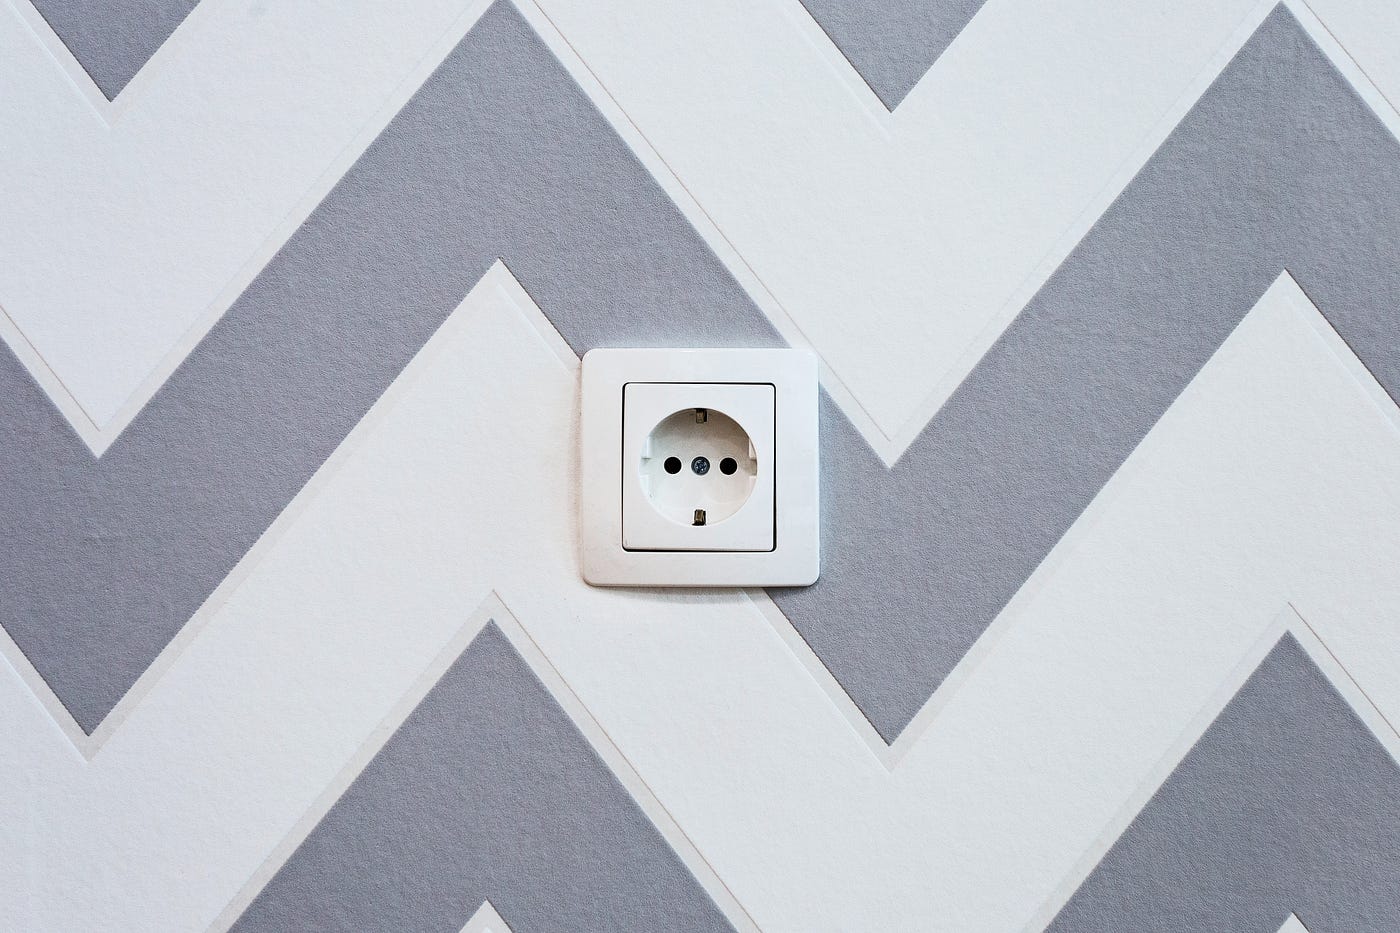 A electrical socket — Complexity should be simple